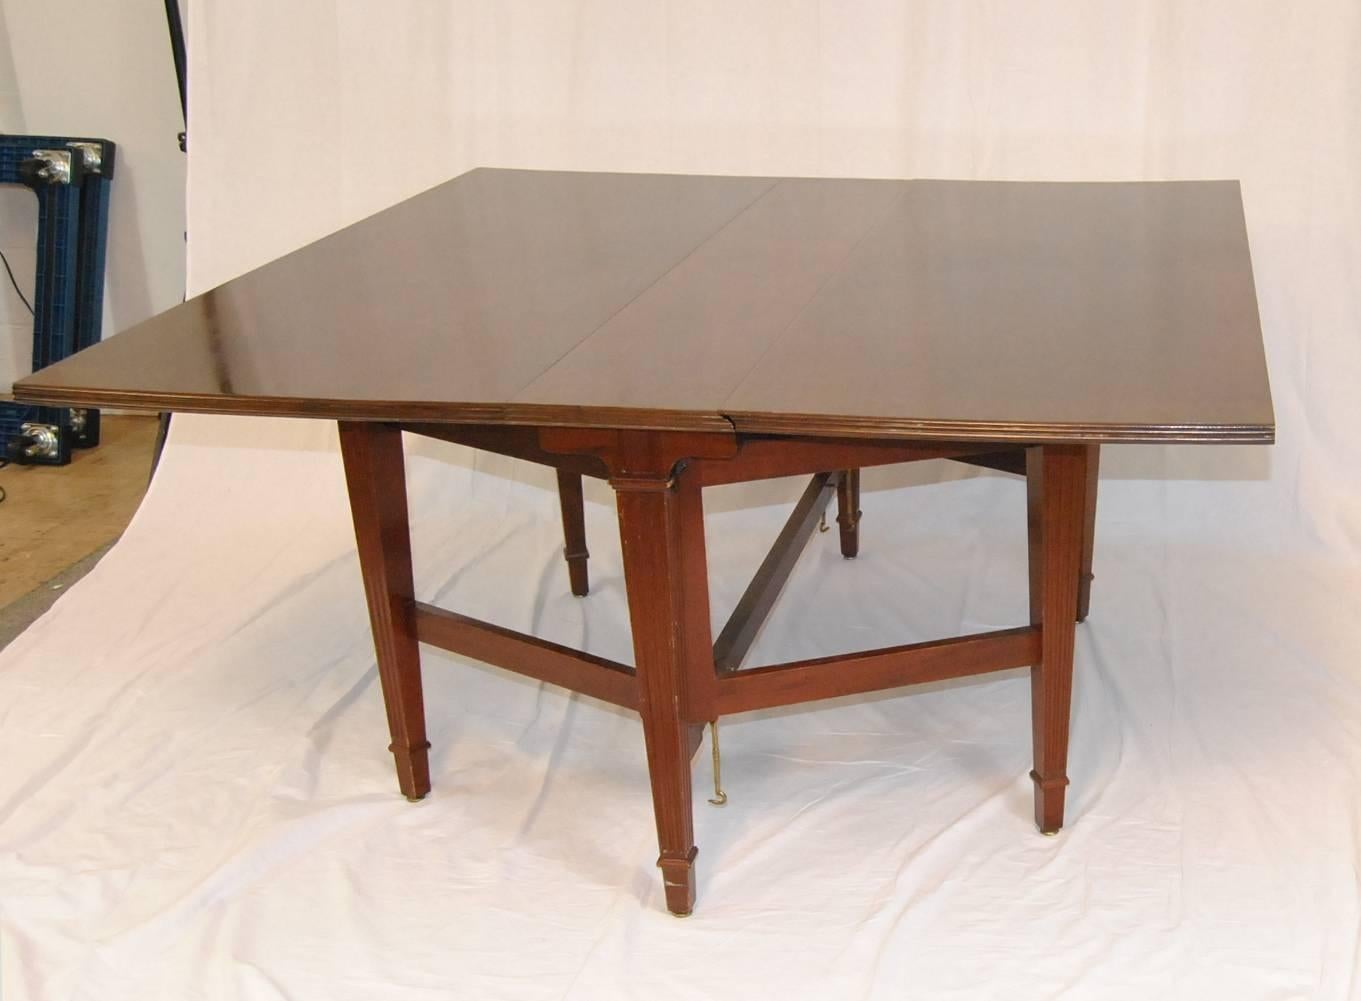 An unusual 25 ft mahogany conference table by Irving & Casson / A. H. Davenport Company.  This conference table is comprised of 5 gateleg drop leaf tables with solid brass connecting hardware.  Each table has a banded top with center done in a